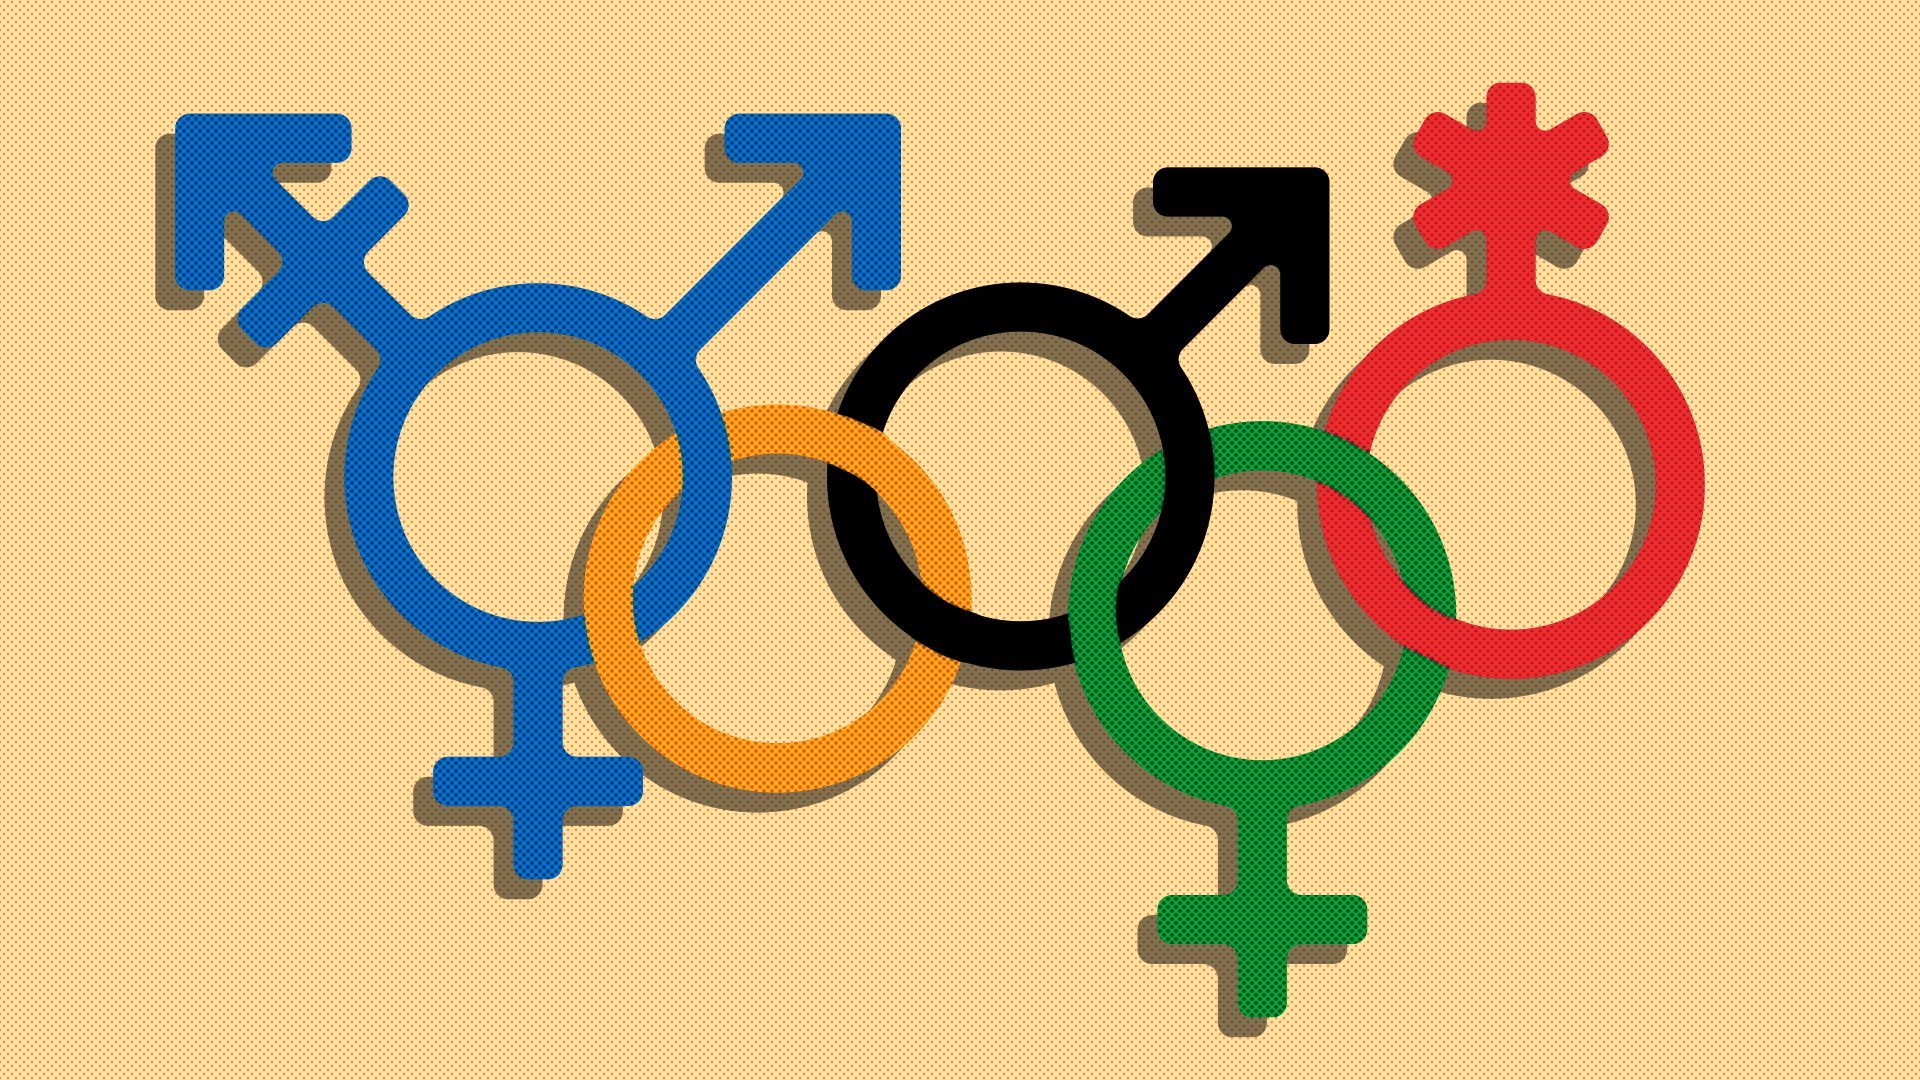 Illustration of the Olympic rings stylized as various gender identity icons